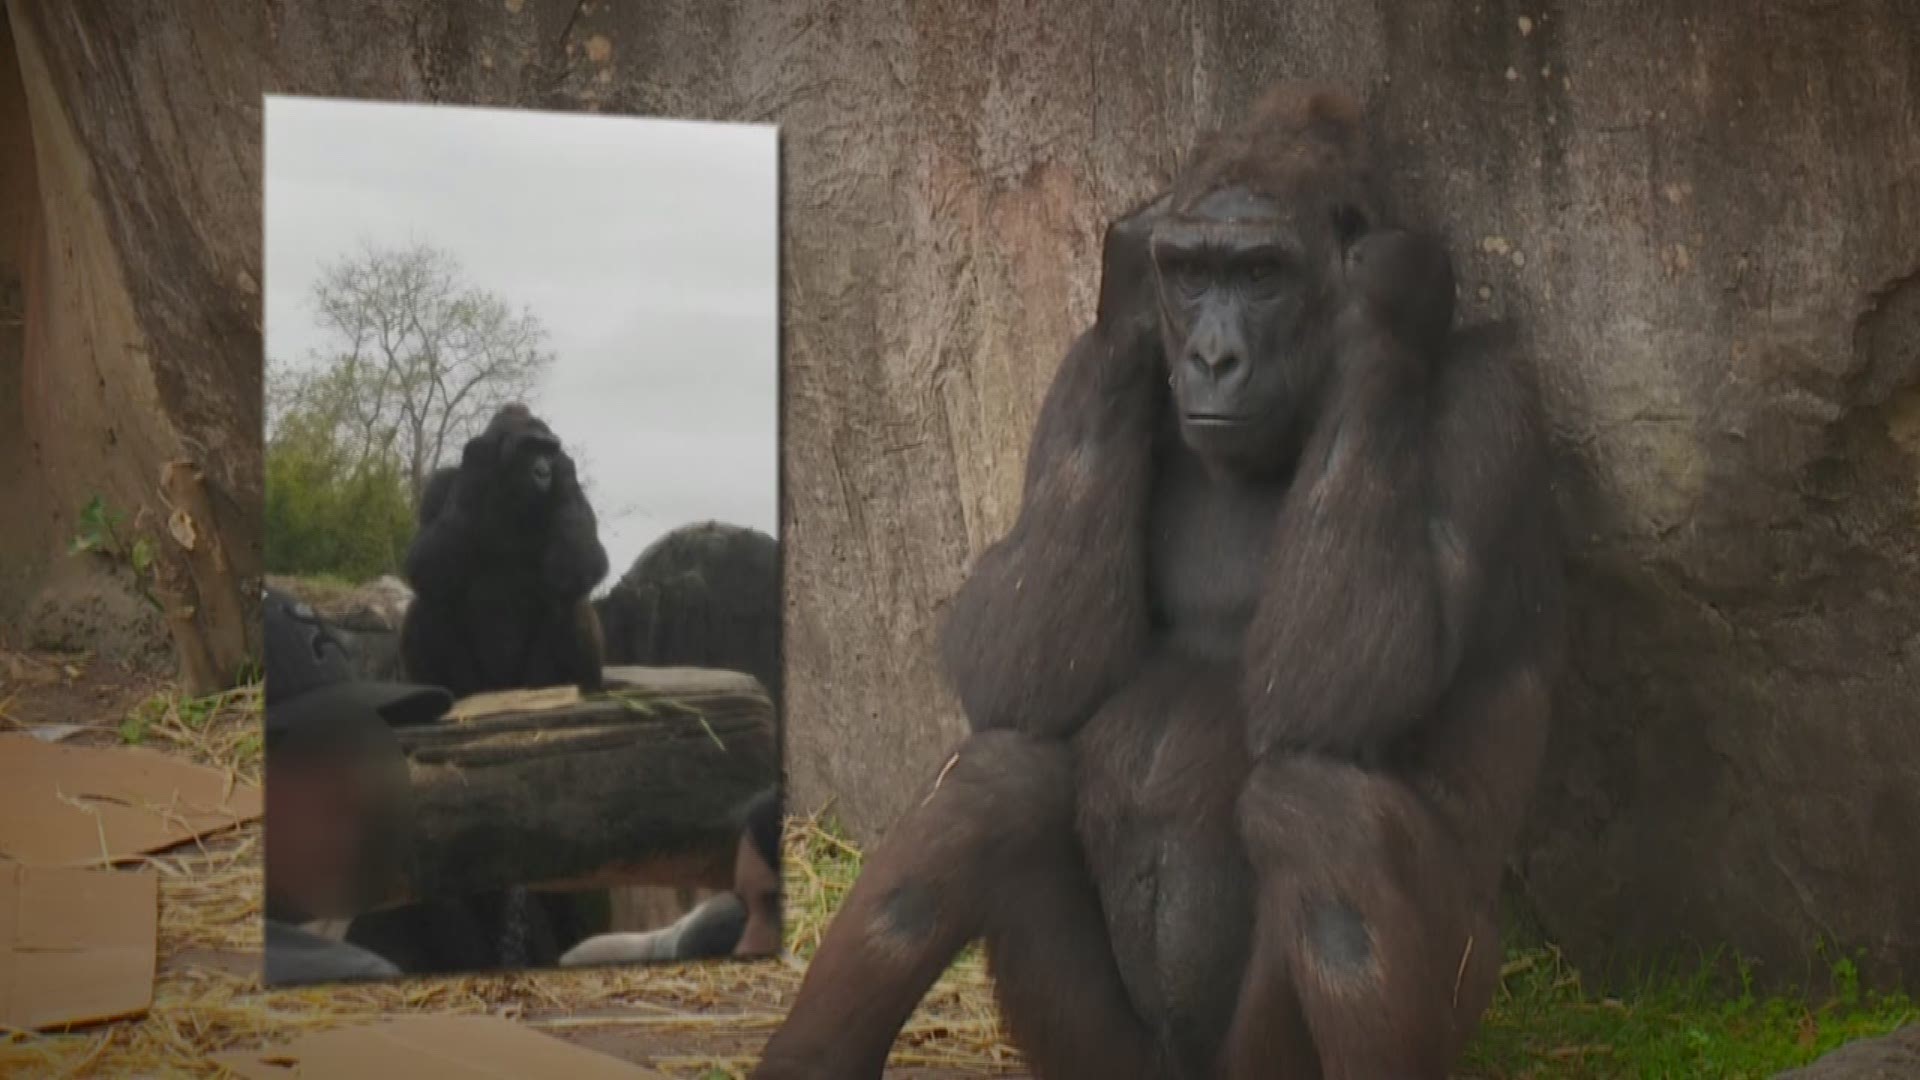 Paul Murphy talks to a pregnant woman who says a gorilla threw a block of wood at her.